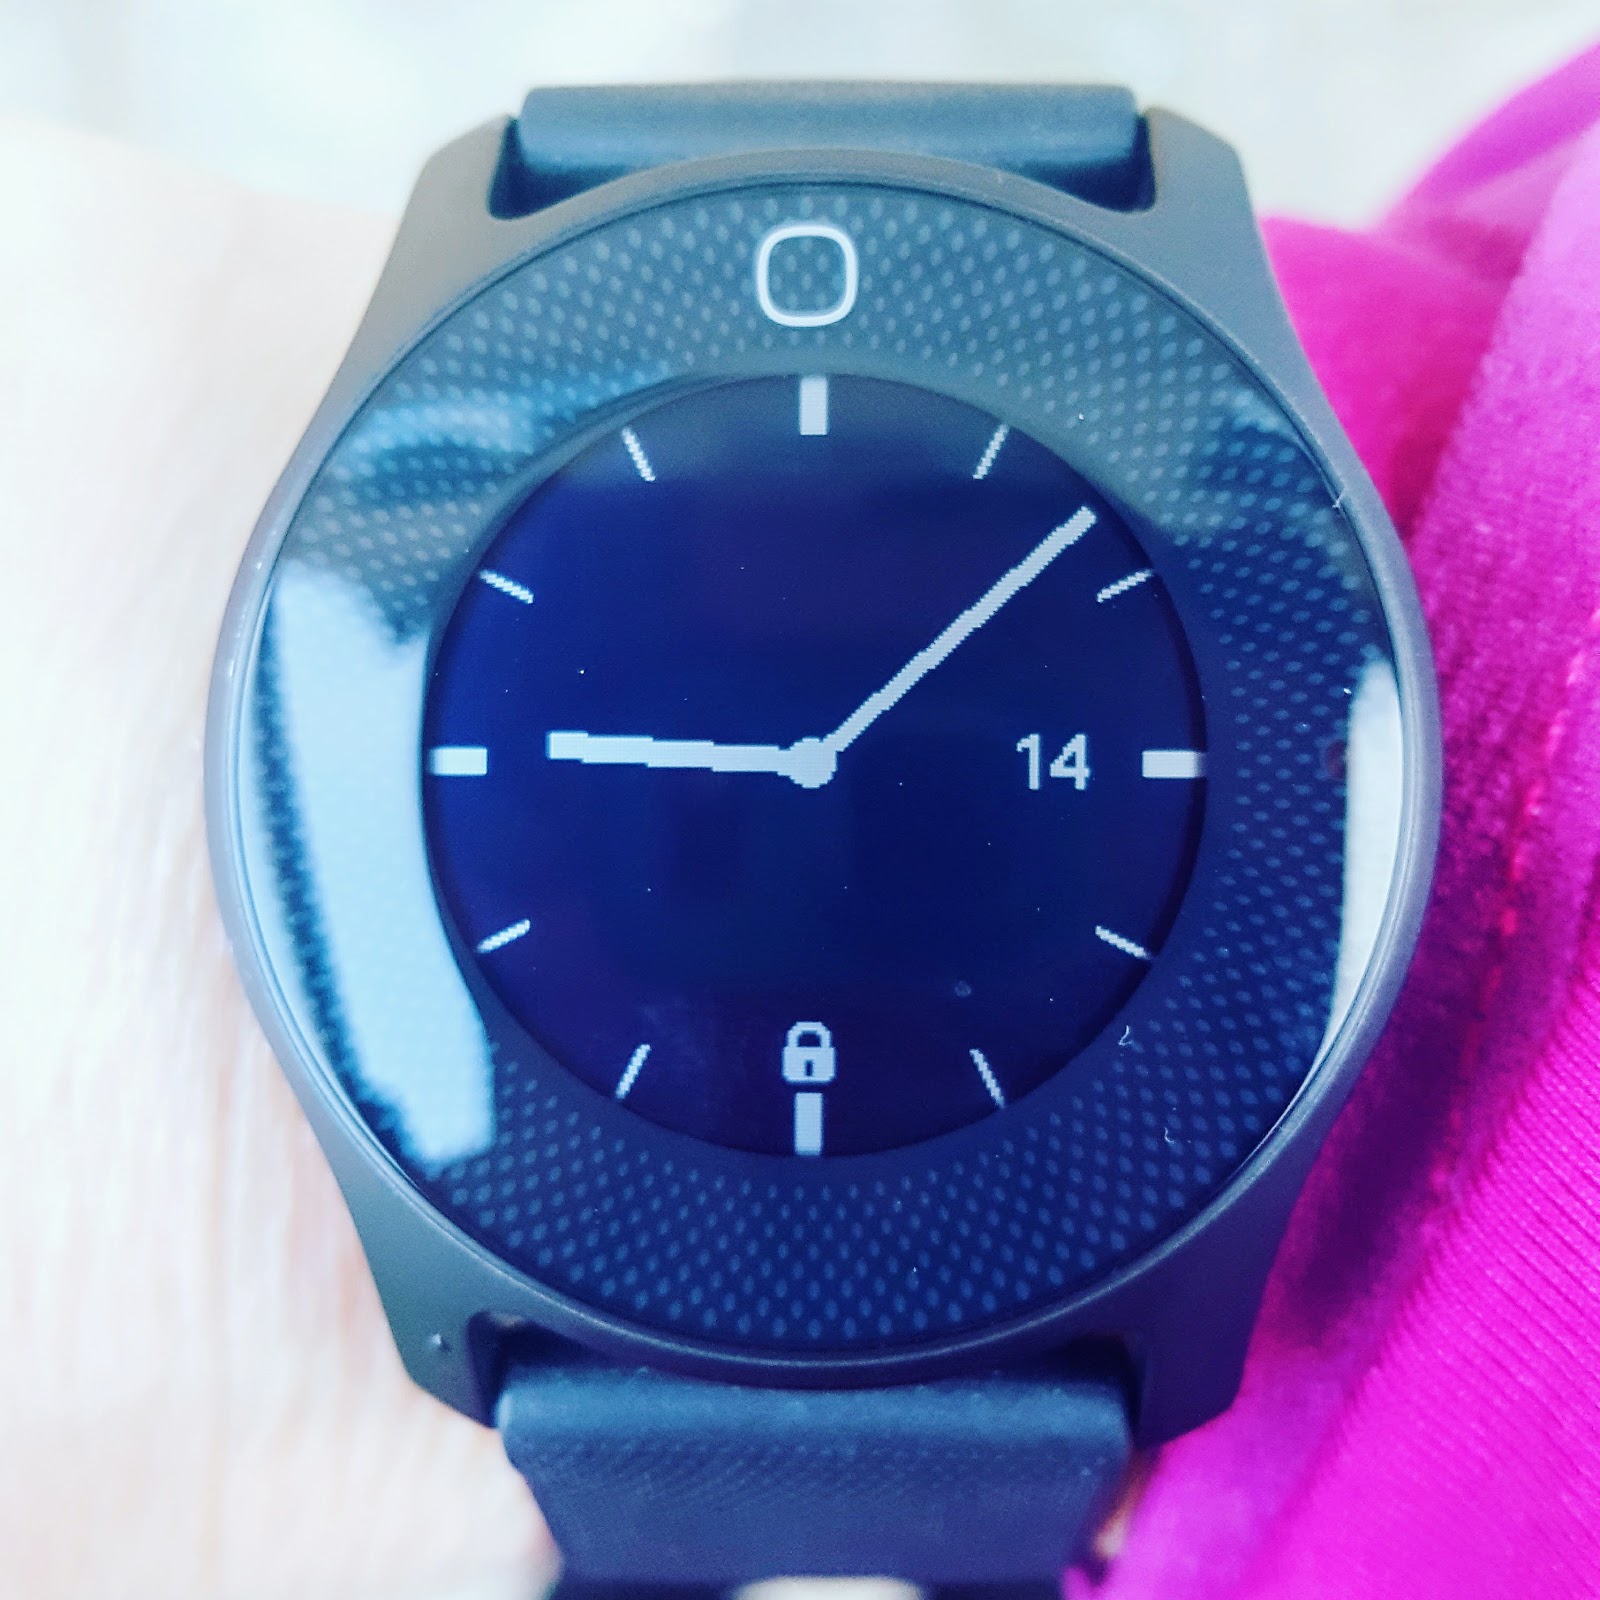 Philips Health Watch Review: Keeping Track